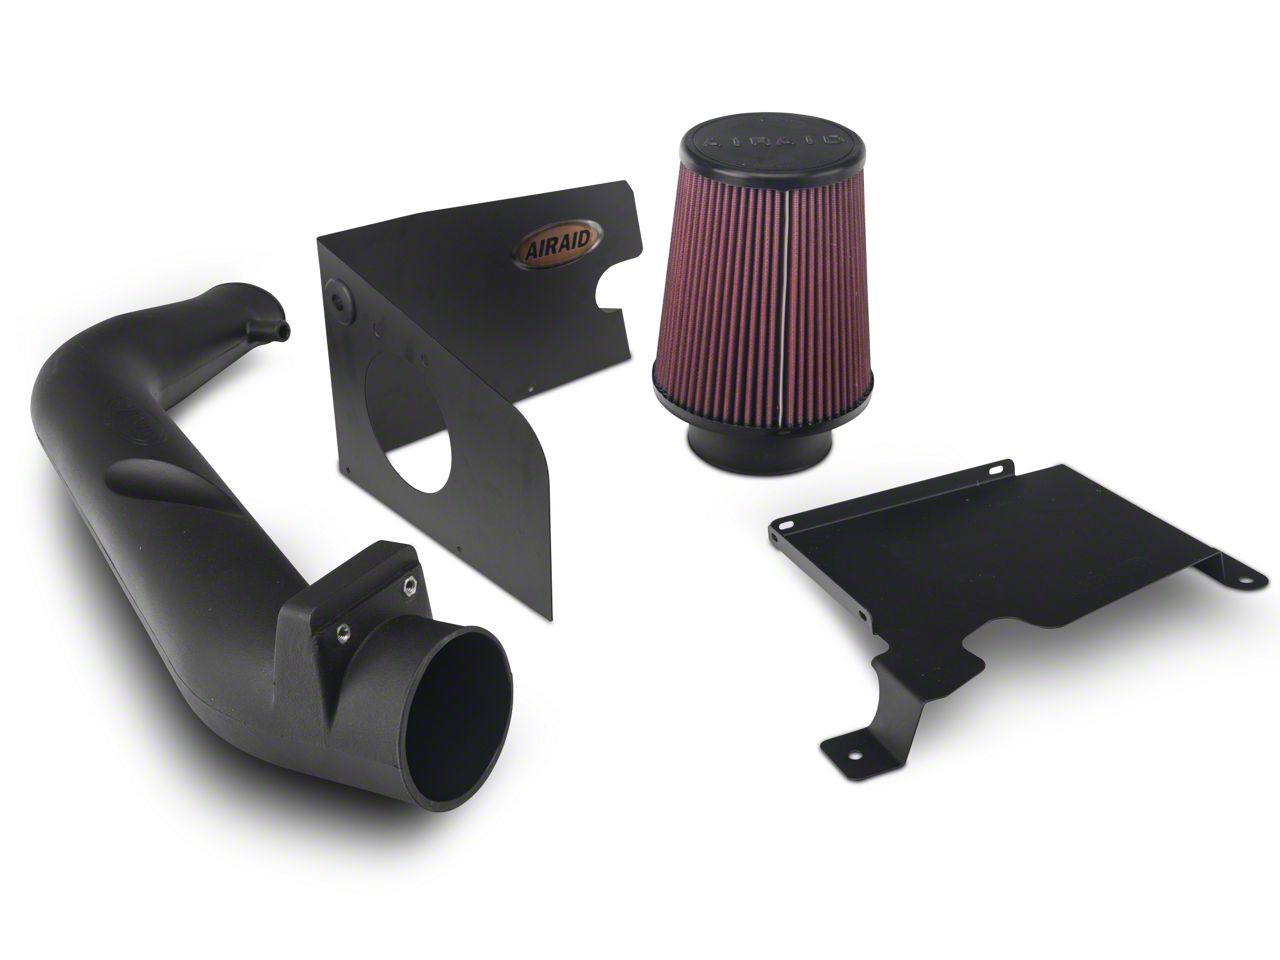 Airaid Jeep Wrangler Cold Air Dam Intake with Red SynthaFlow Oiled Filter  AIR-310-137 (03-06 2.4L Jeep Wrangler TJ) Free Shipping